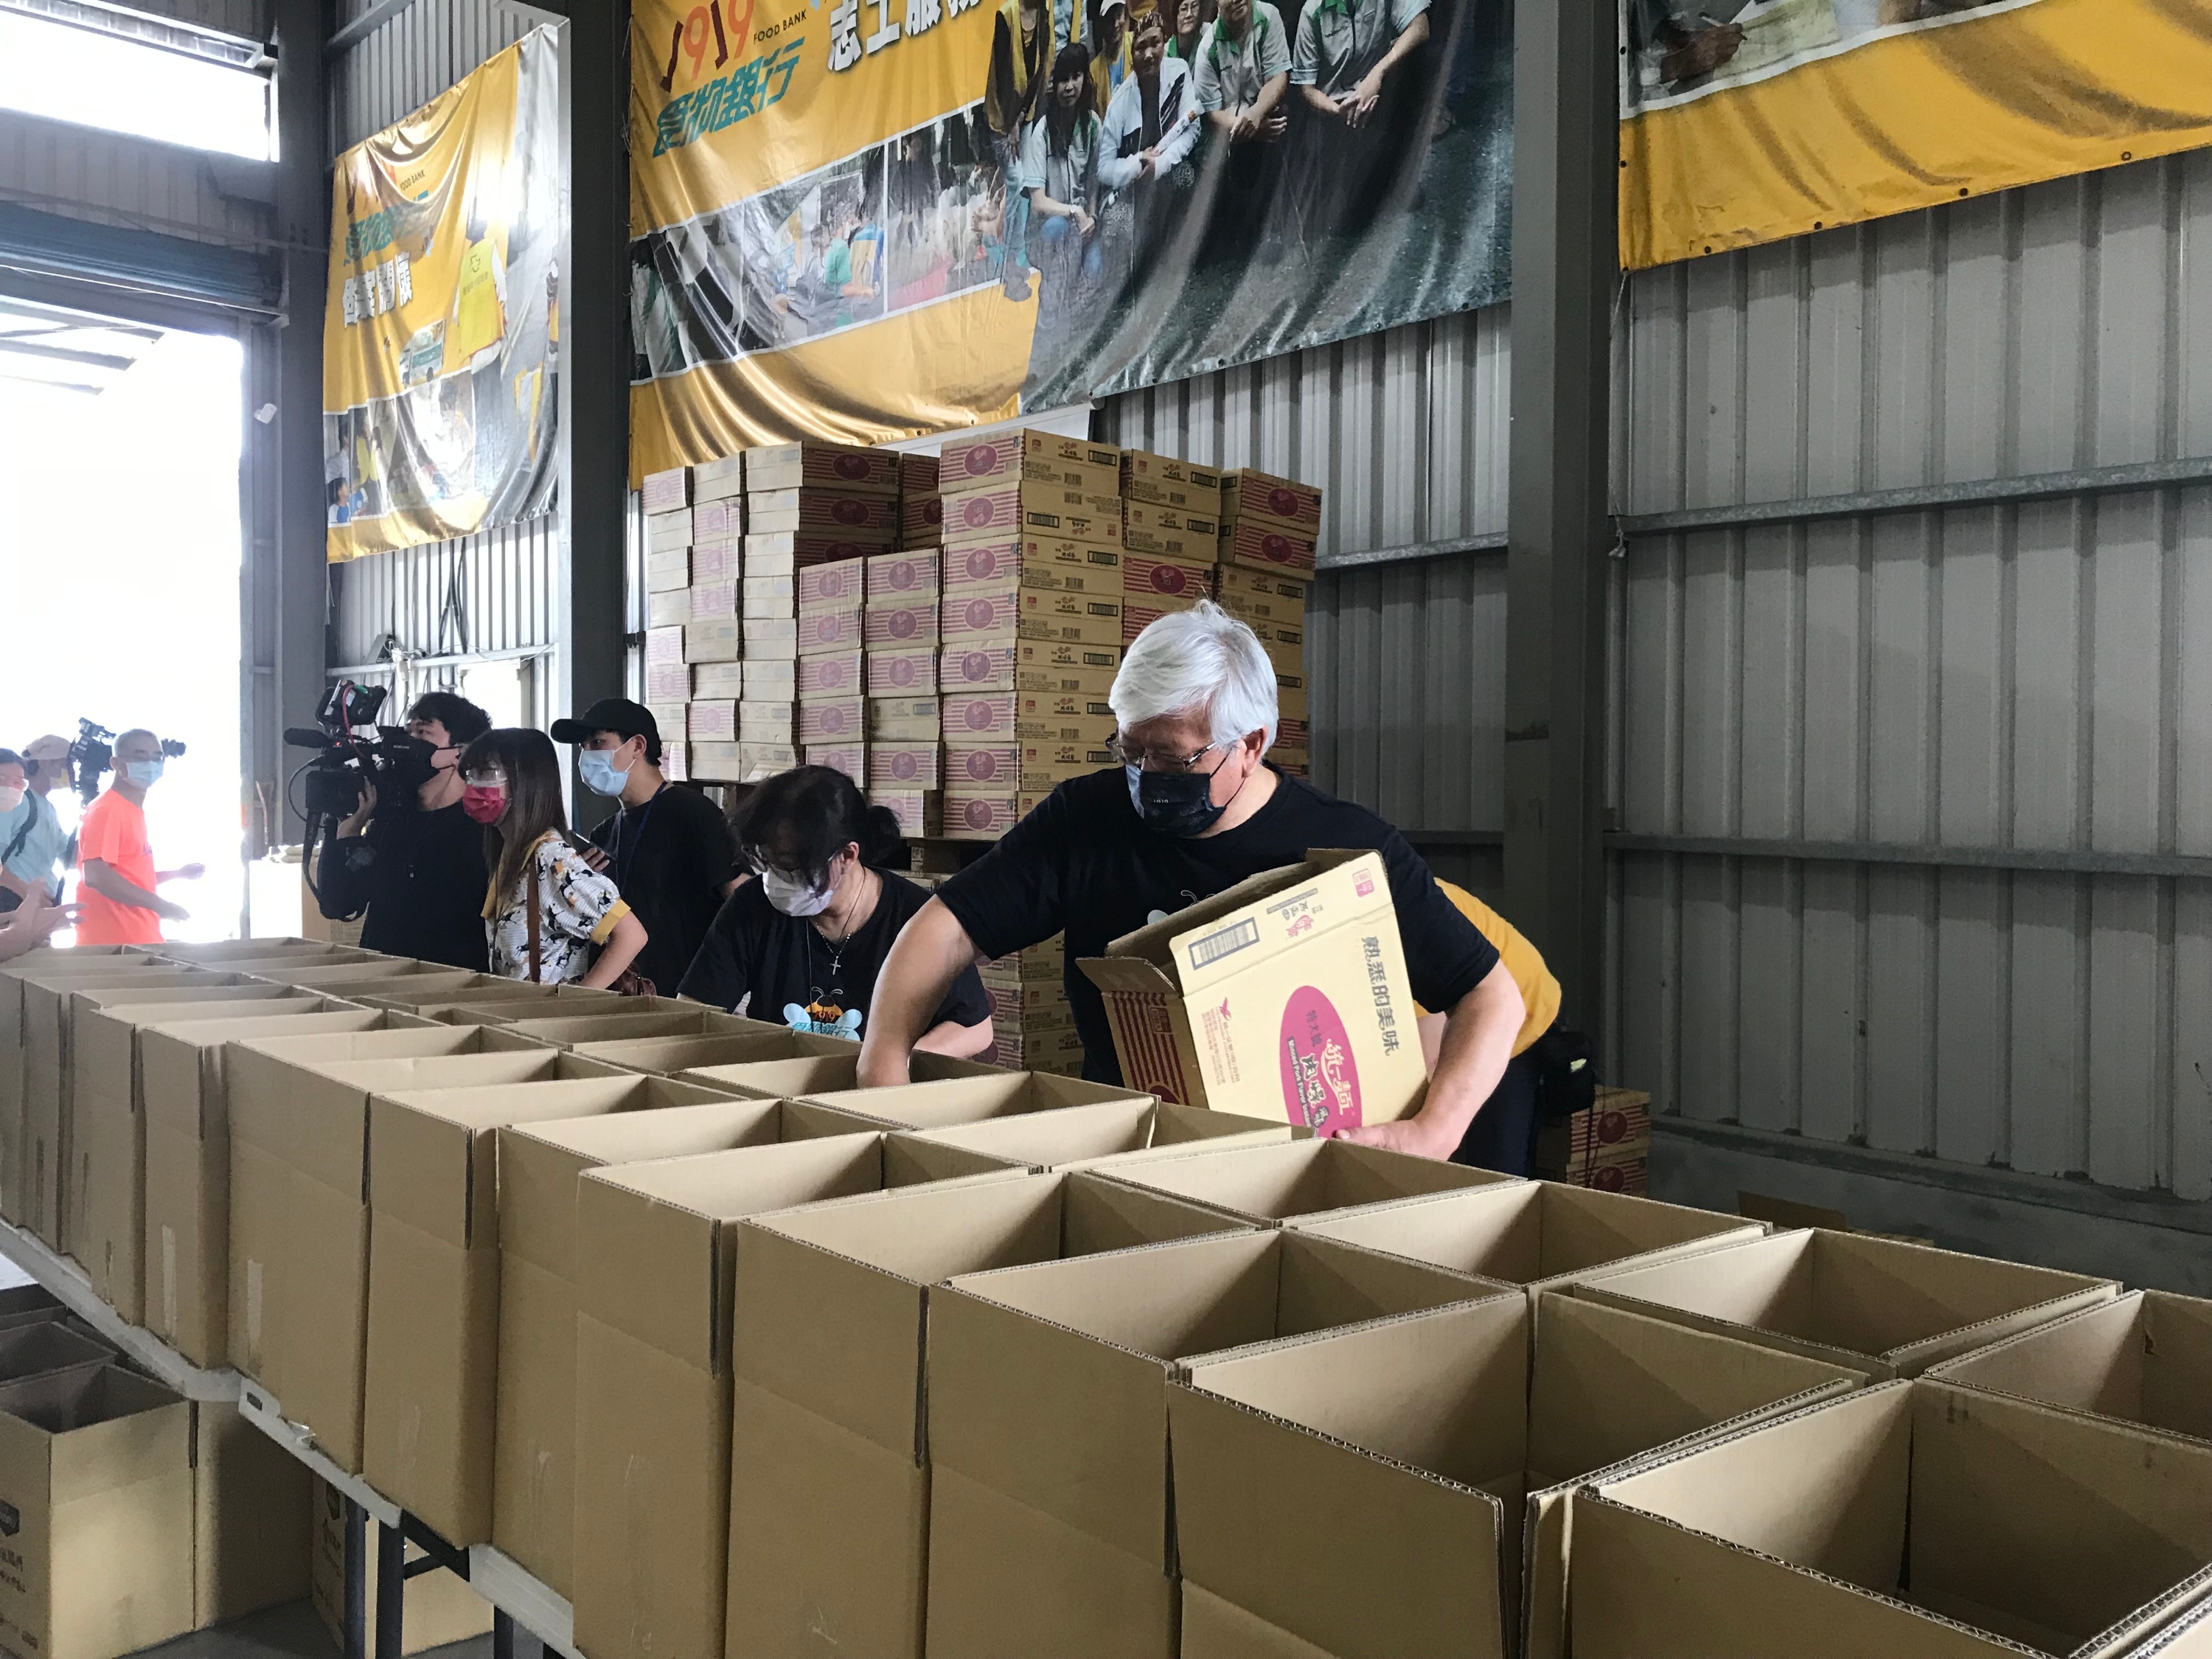 Home delivery of food boxes feeds disadvantaged families